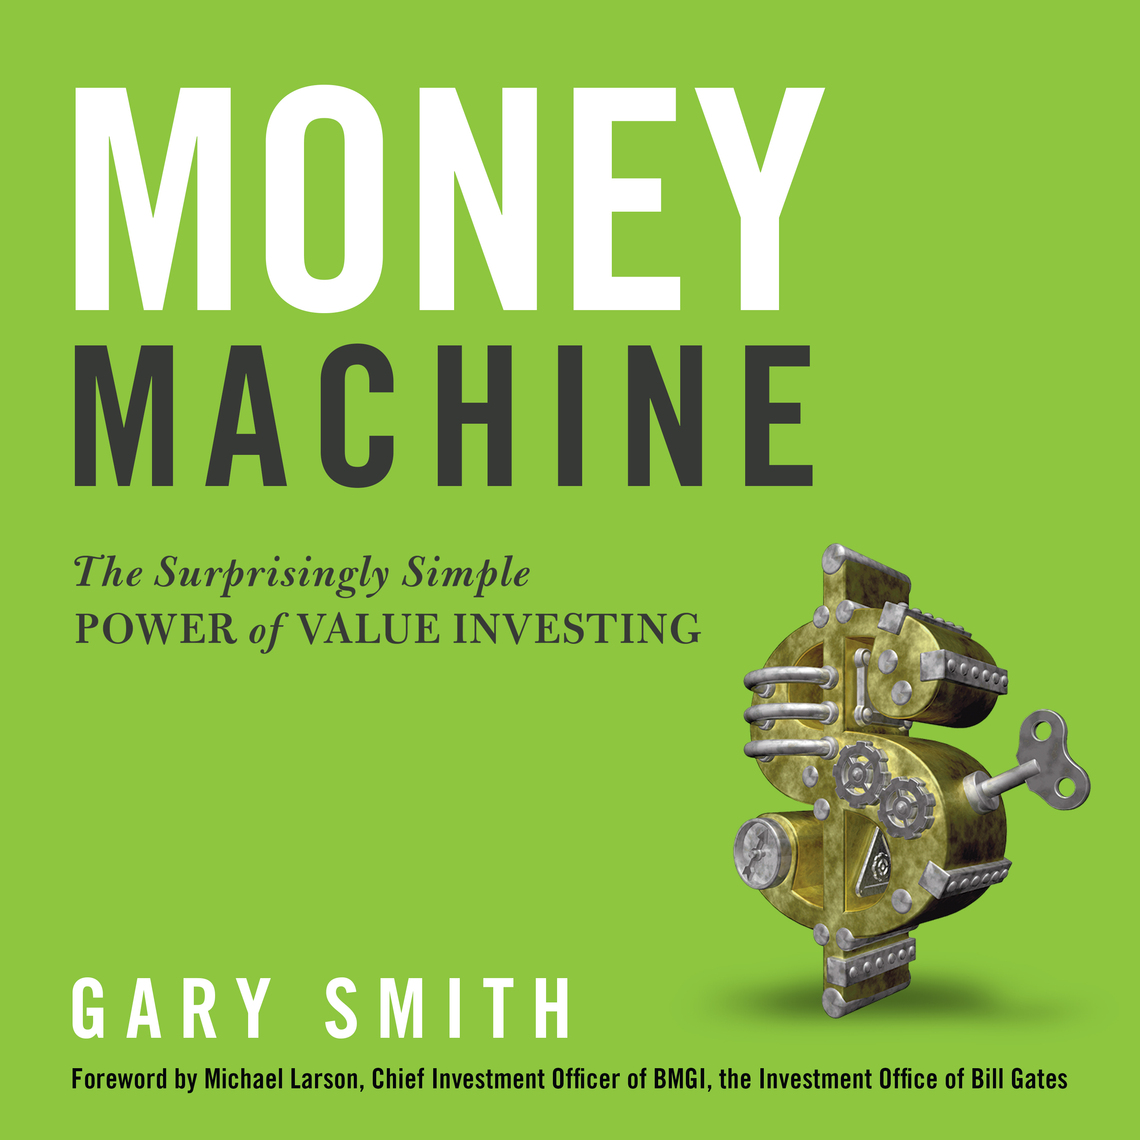 Money, Greed and The Meaning of Life, by Chris Herd